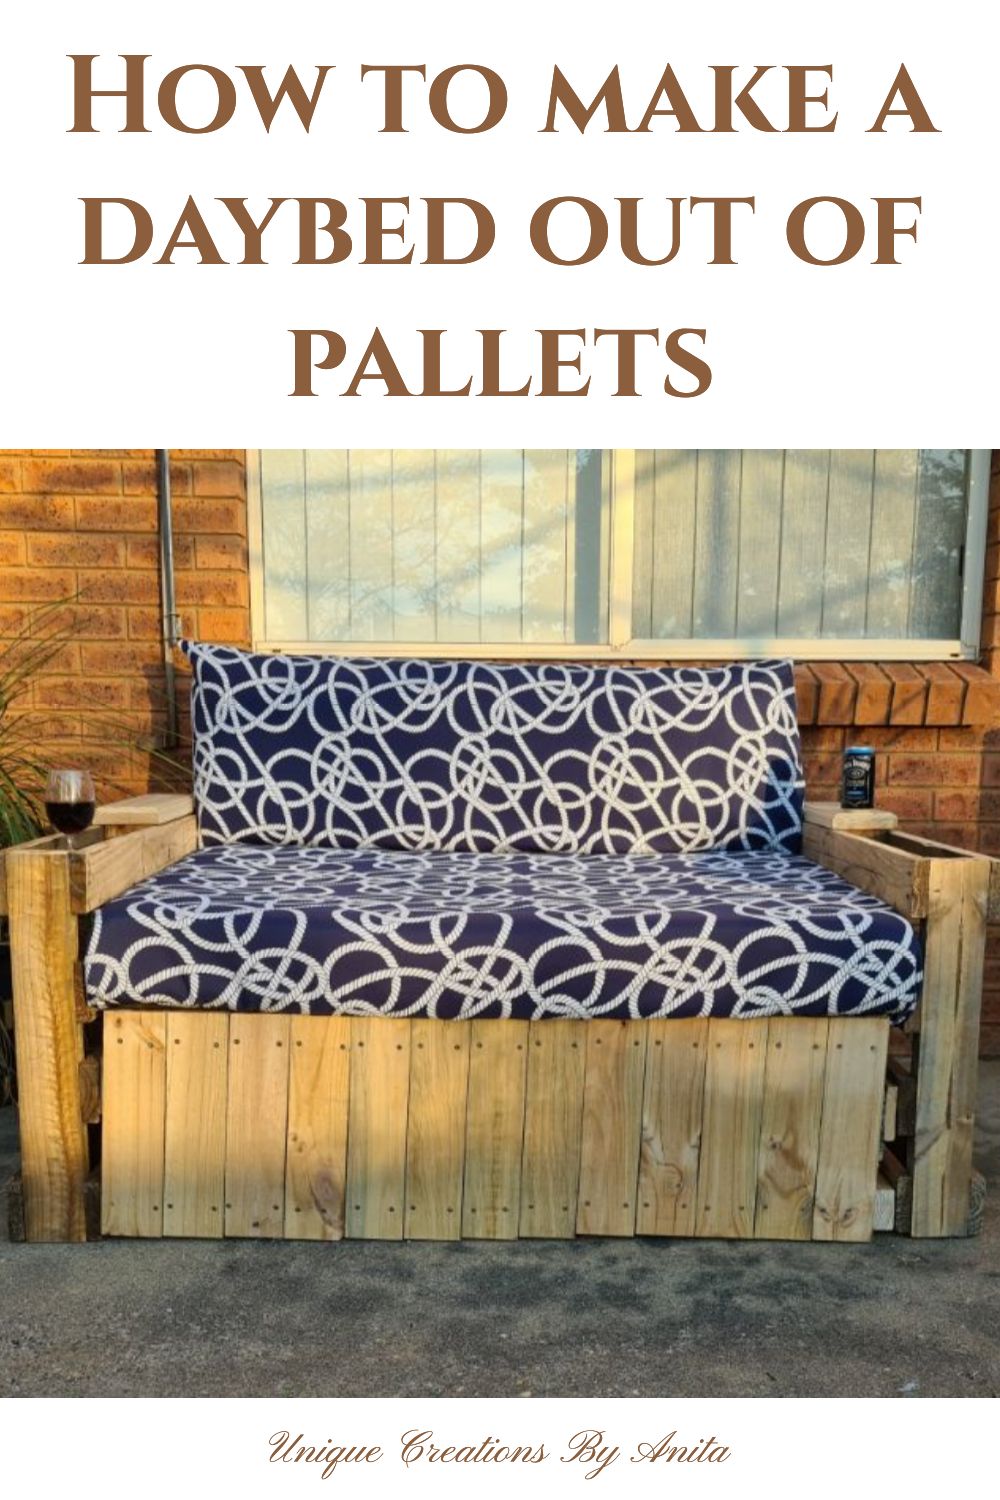 Tutorial on how to recycle pallets into a daybed.